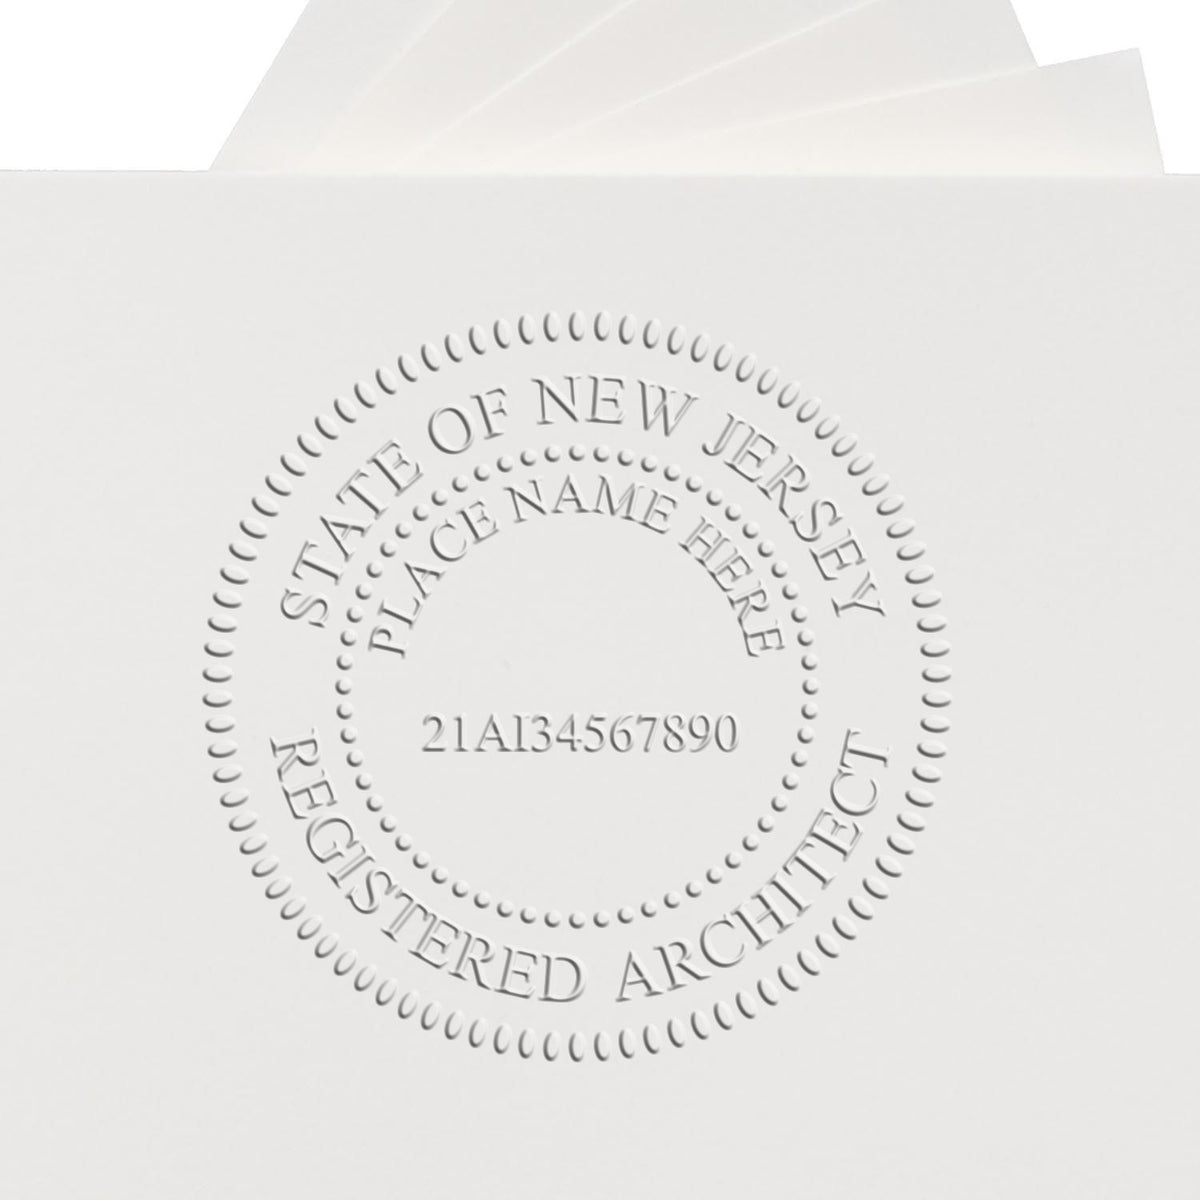 The Gift New Jersey Architect Seal stamp impression comes to life with a crisp, detailed image stamped on paper - showcasing true professional quality.